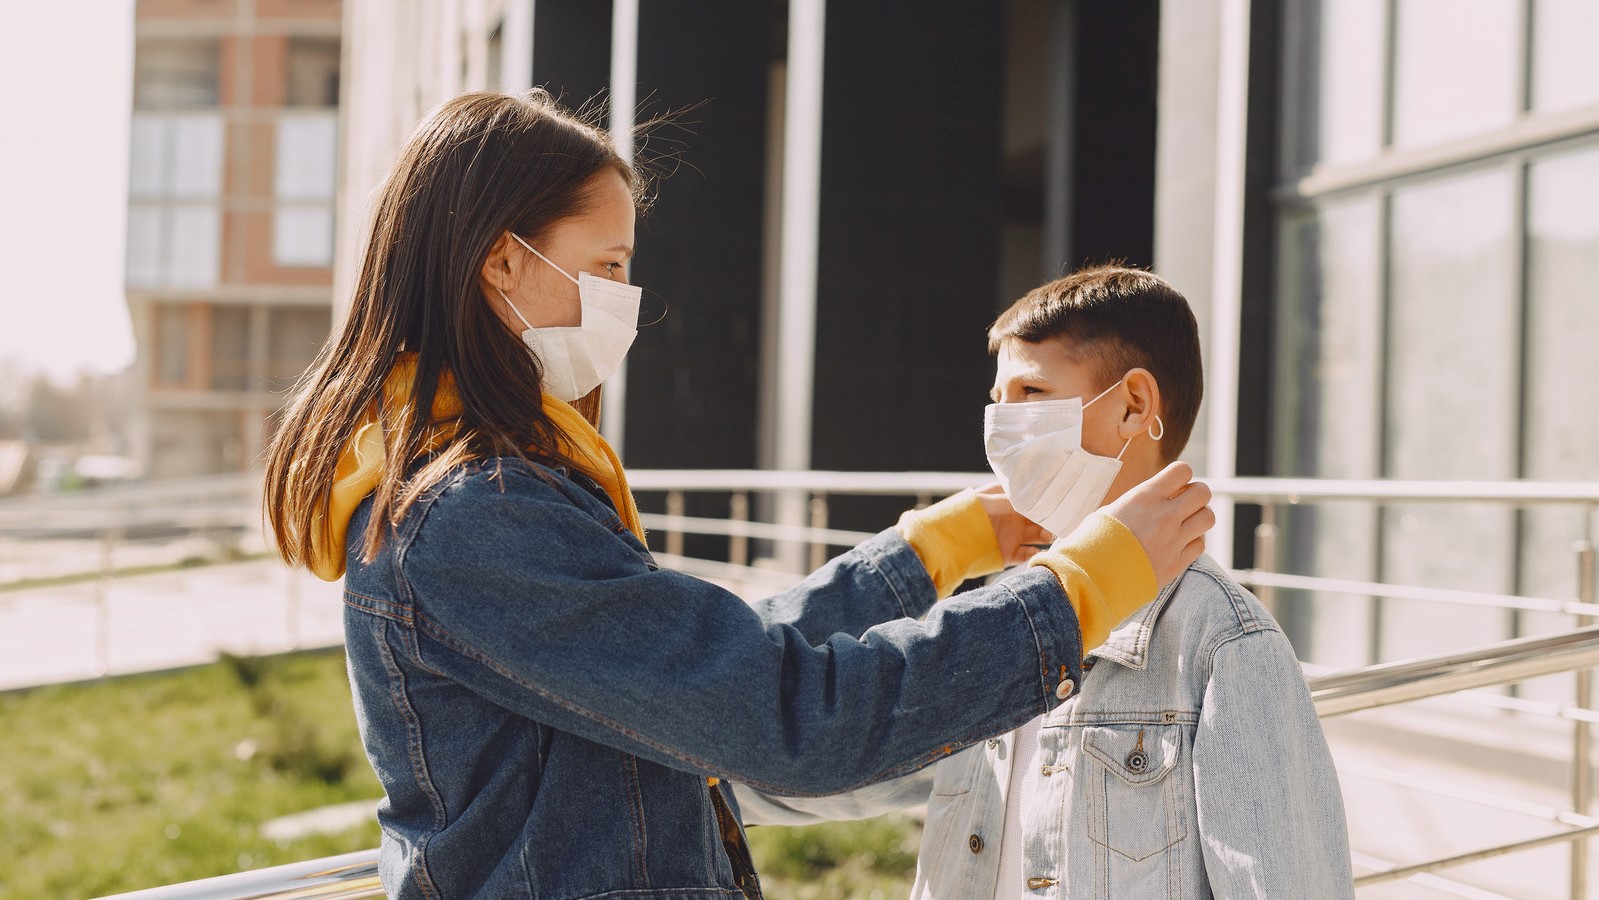 A woman in a yellow jacket is wearing a face mask. She's reaching out and putting a face mask on a young boy in a yellow sweatshirt.